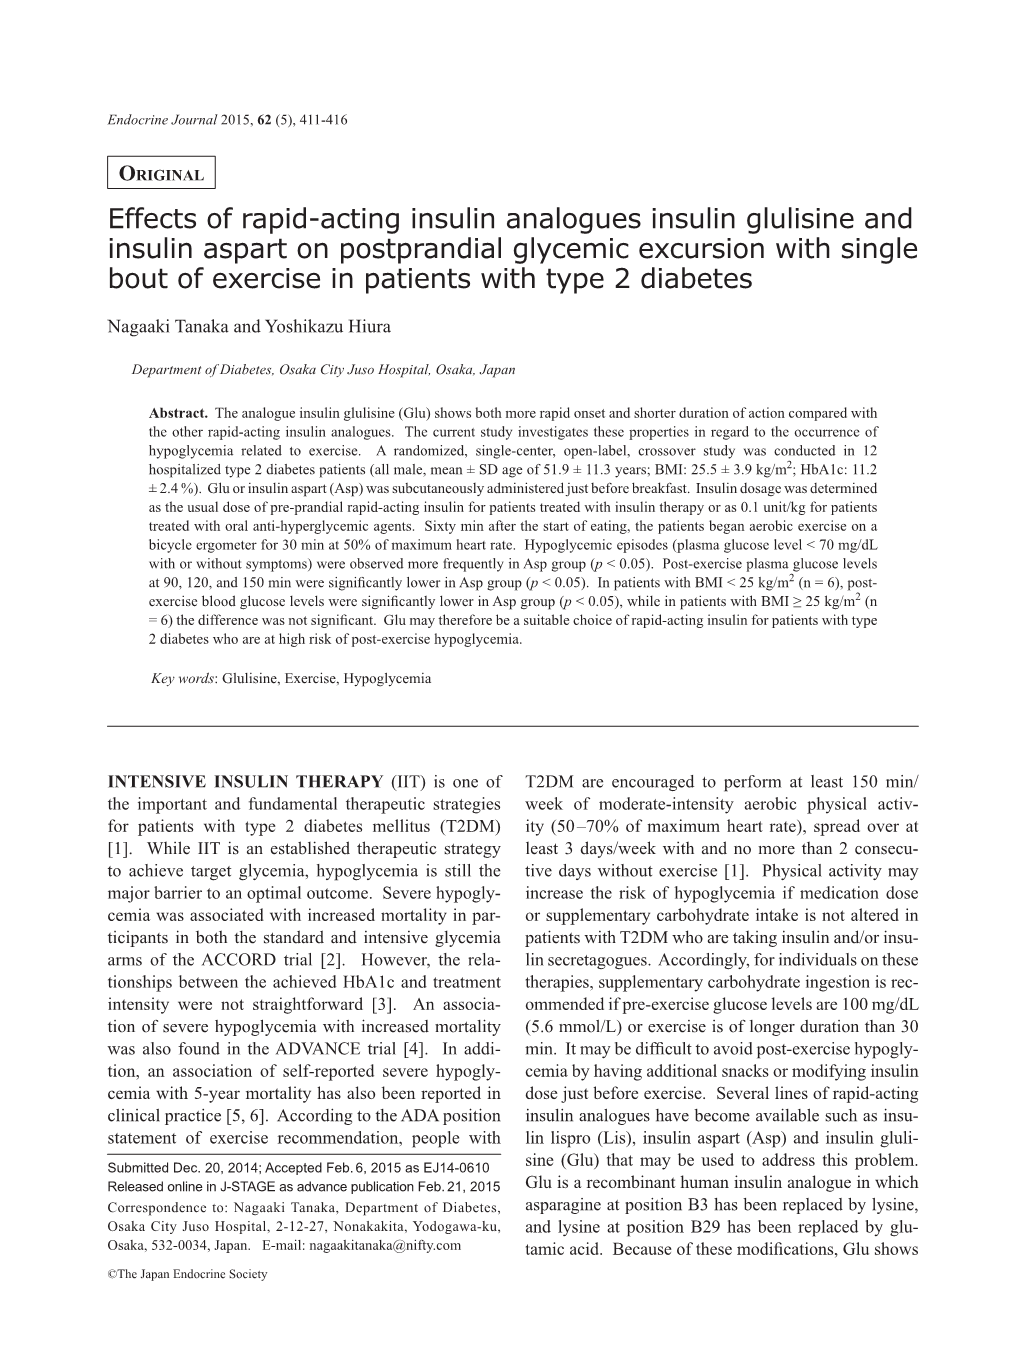 Effects of Rapid-Acting Insulin Analogues Insulin Glulisine And